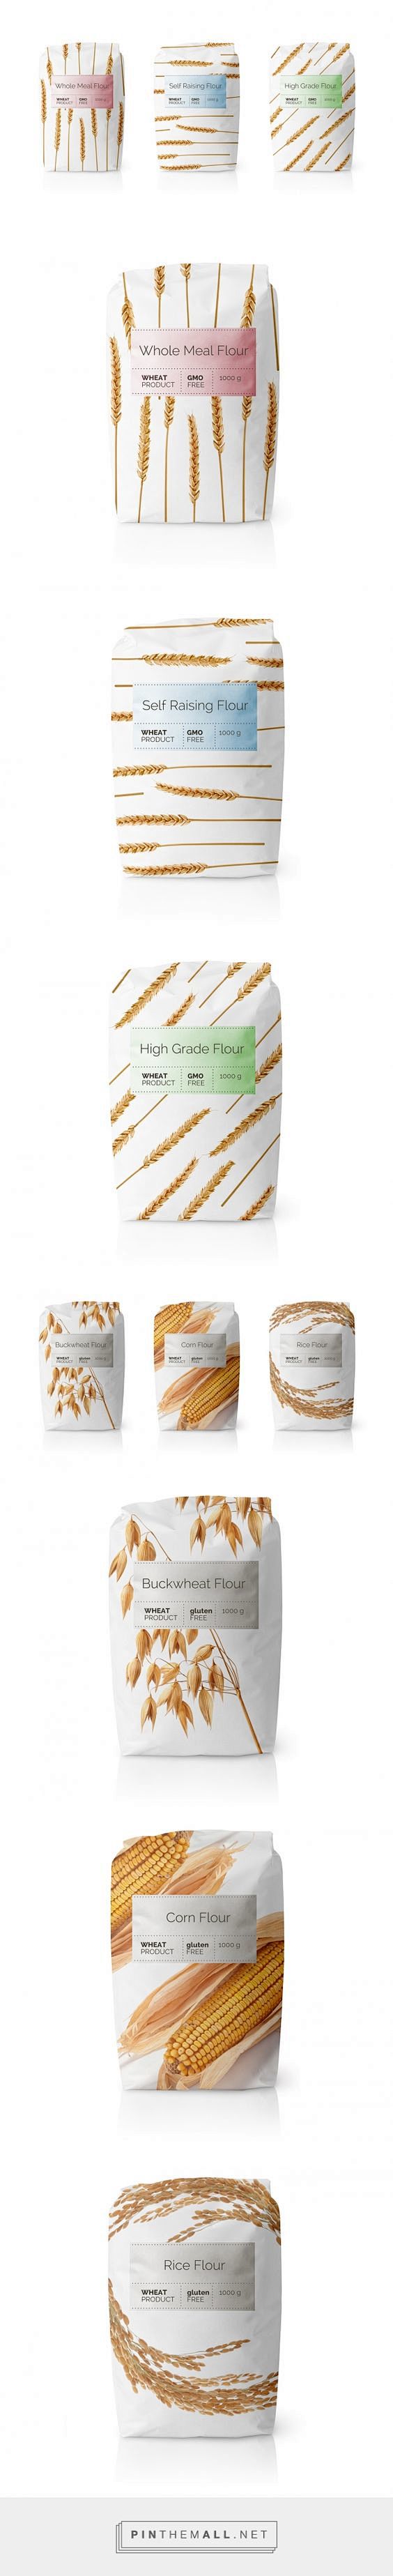 Flour Packaging by M...